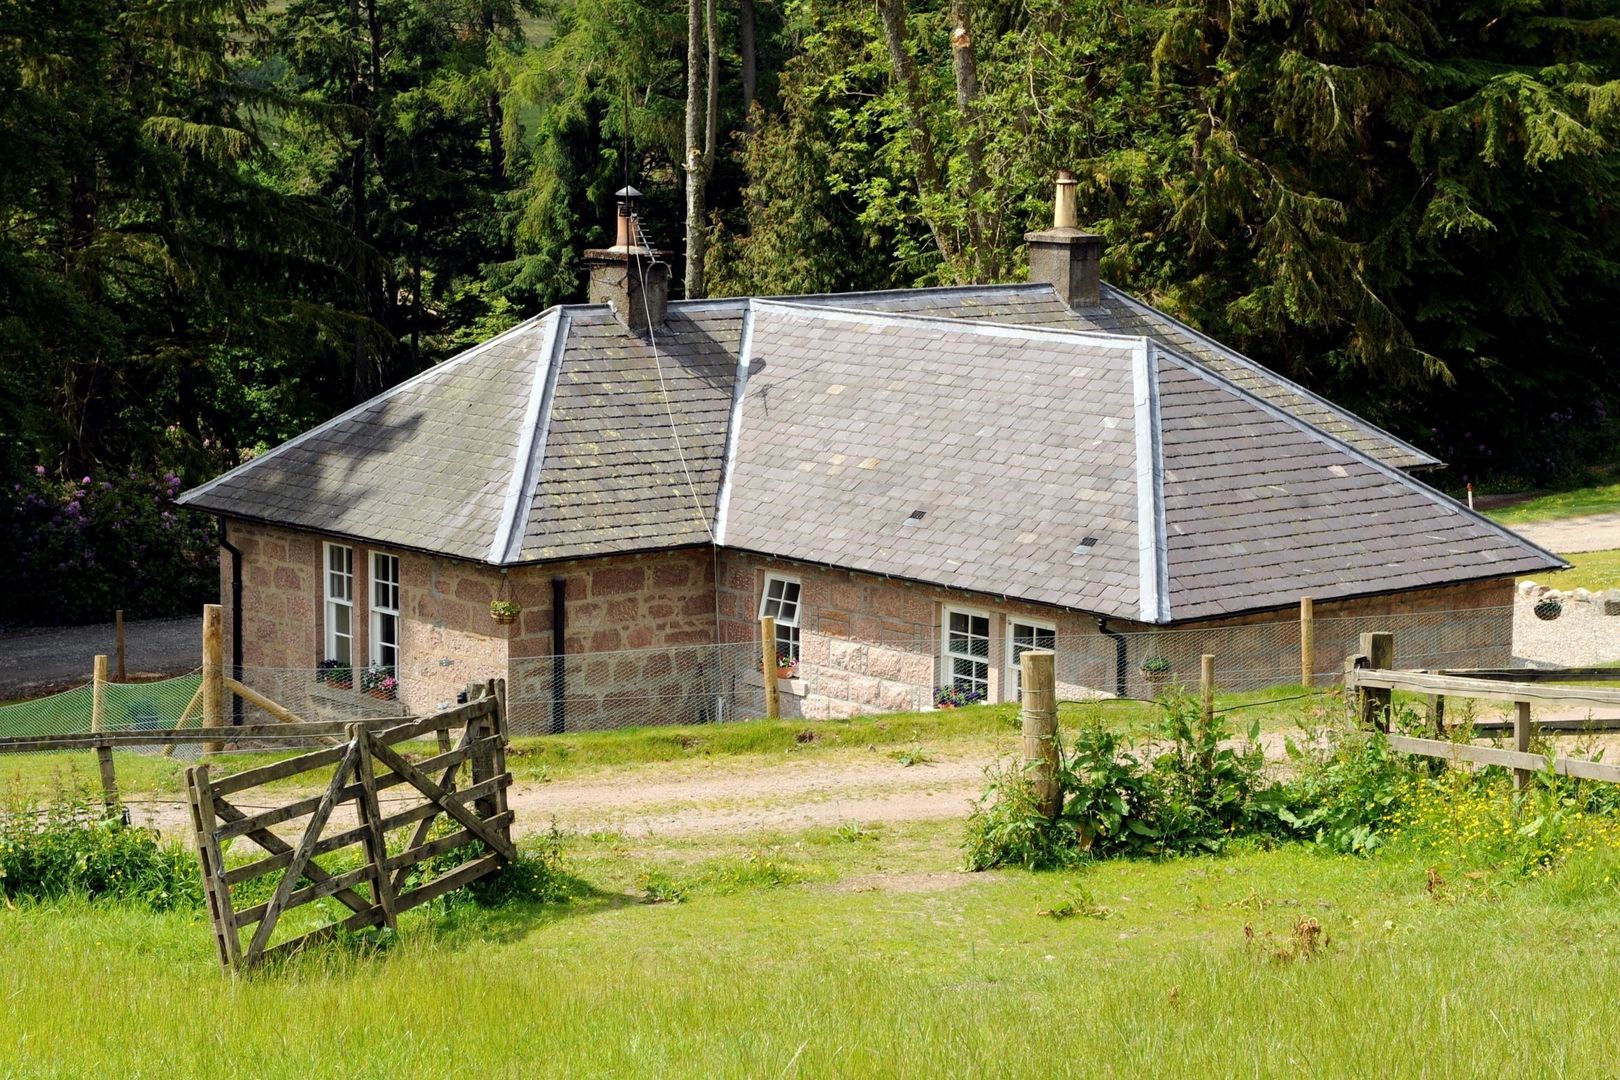 Laundry Cottage, Glen Dye, Banchory, Aberdeenshire, Roundhouse Architecture Ltd Roundhouse Architecture Ltd Country style house